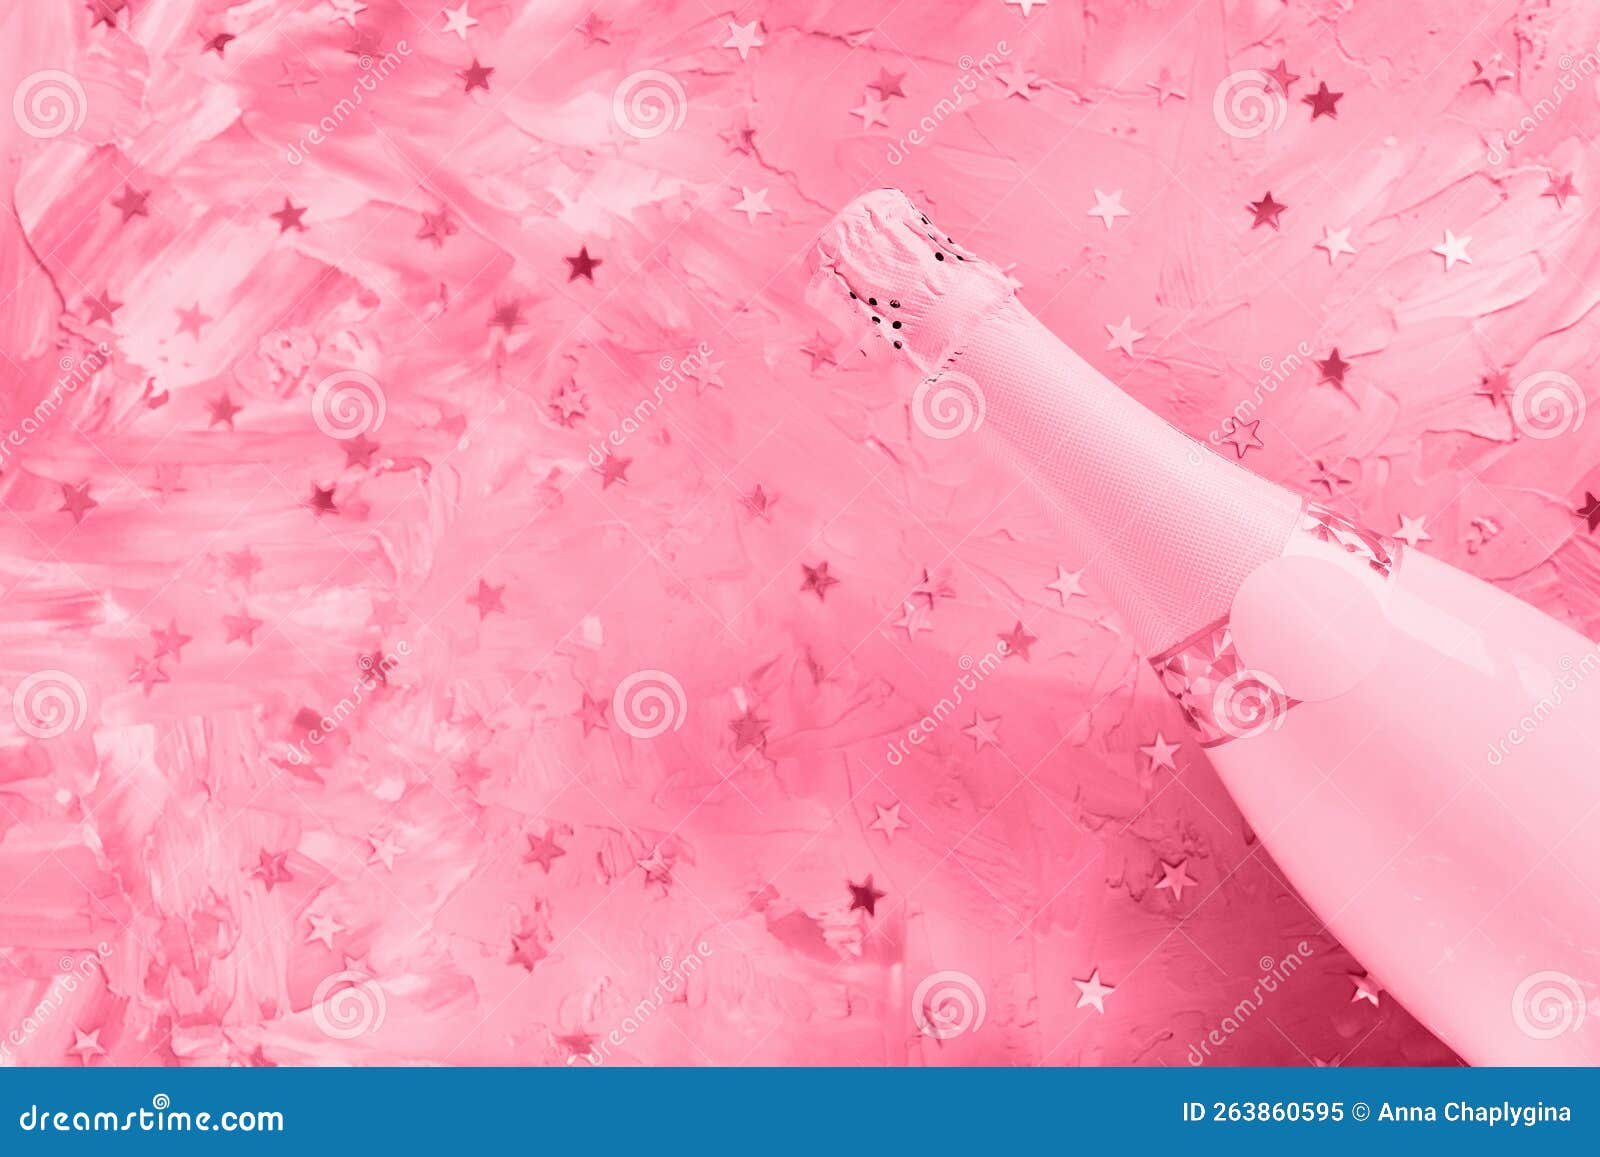 https://thumbs.dreamstime.com/z/color-year-viva-magenta-white-champagne-party-bottle-metallic-stars-confetti-pink-background-flat-lay-copy-space-new-263860595.jpg